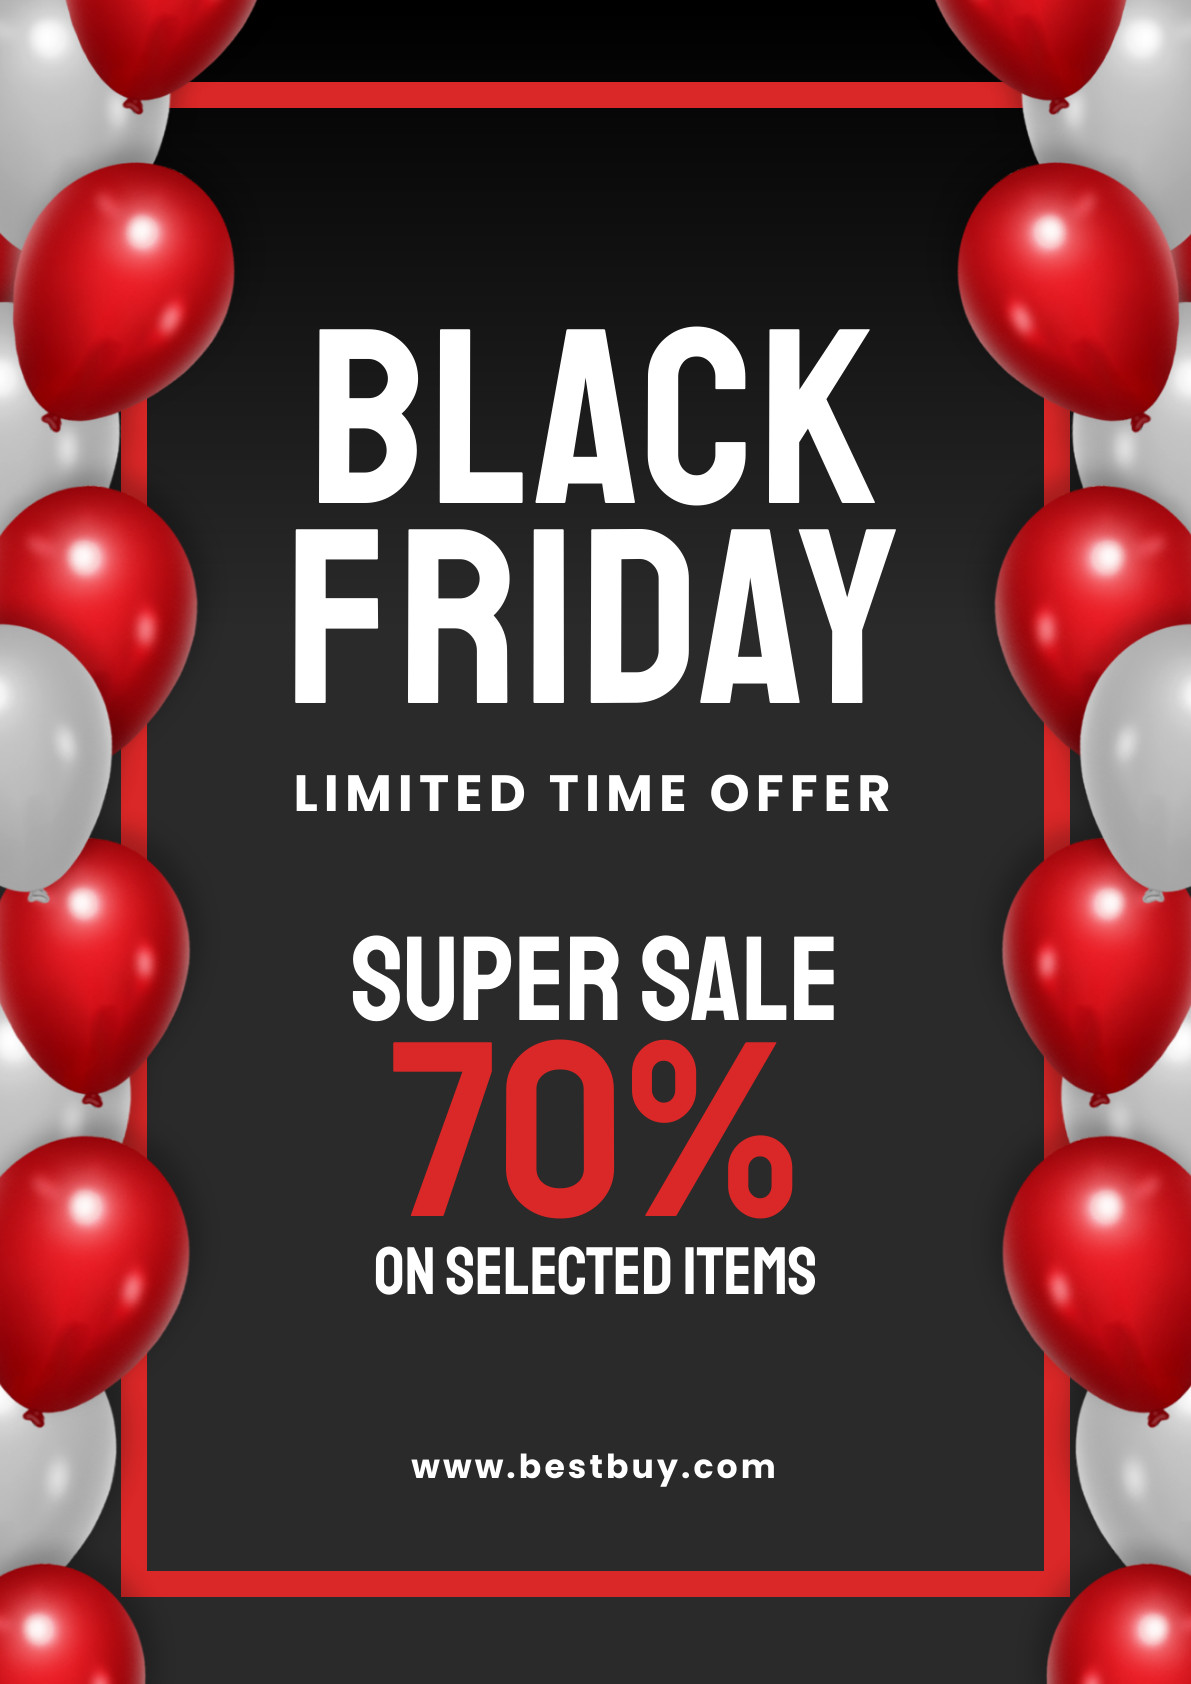 Black Friday Balloon Time Offer Poster